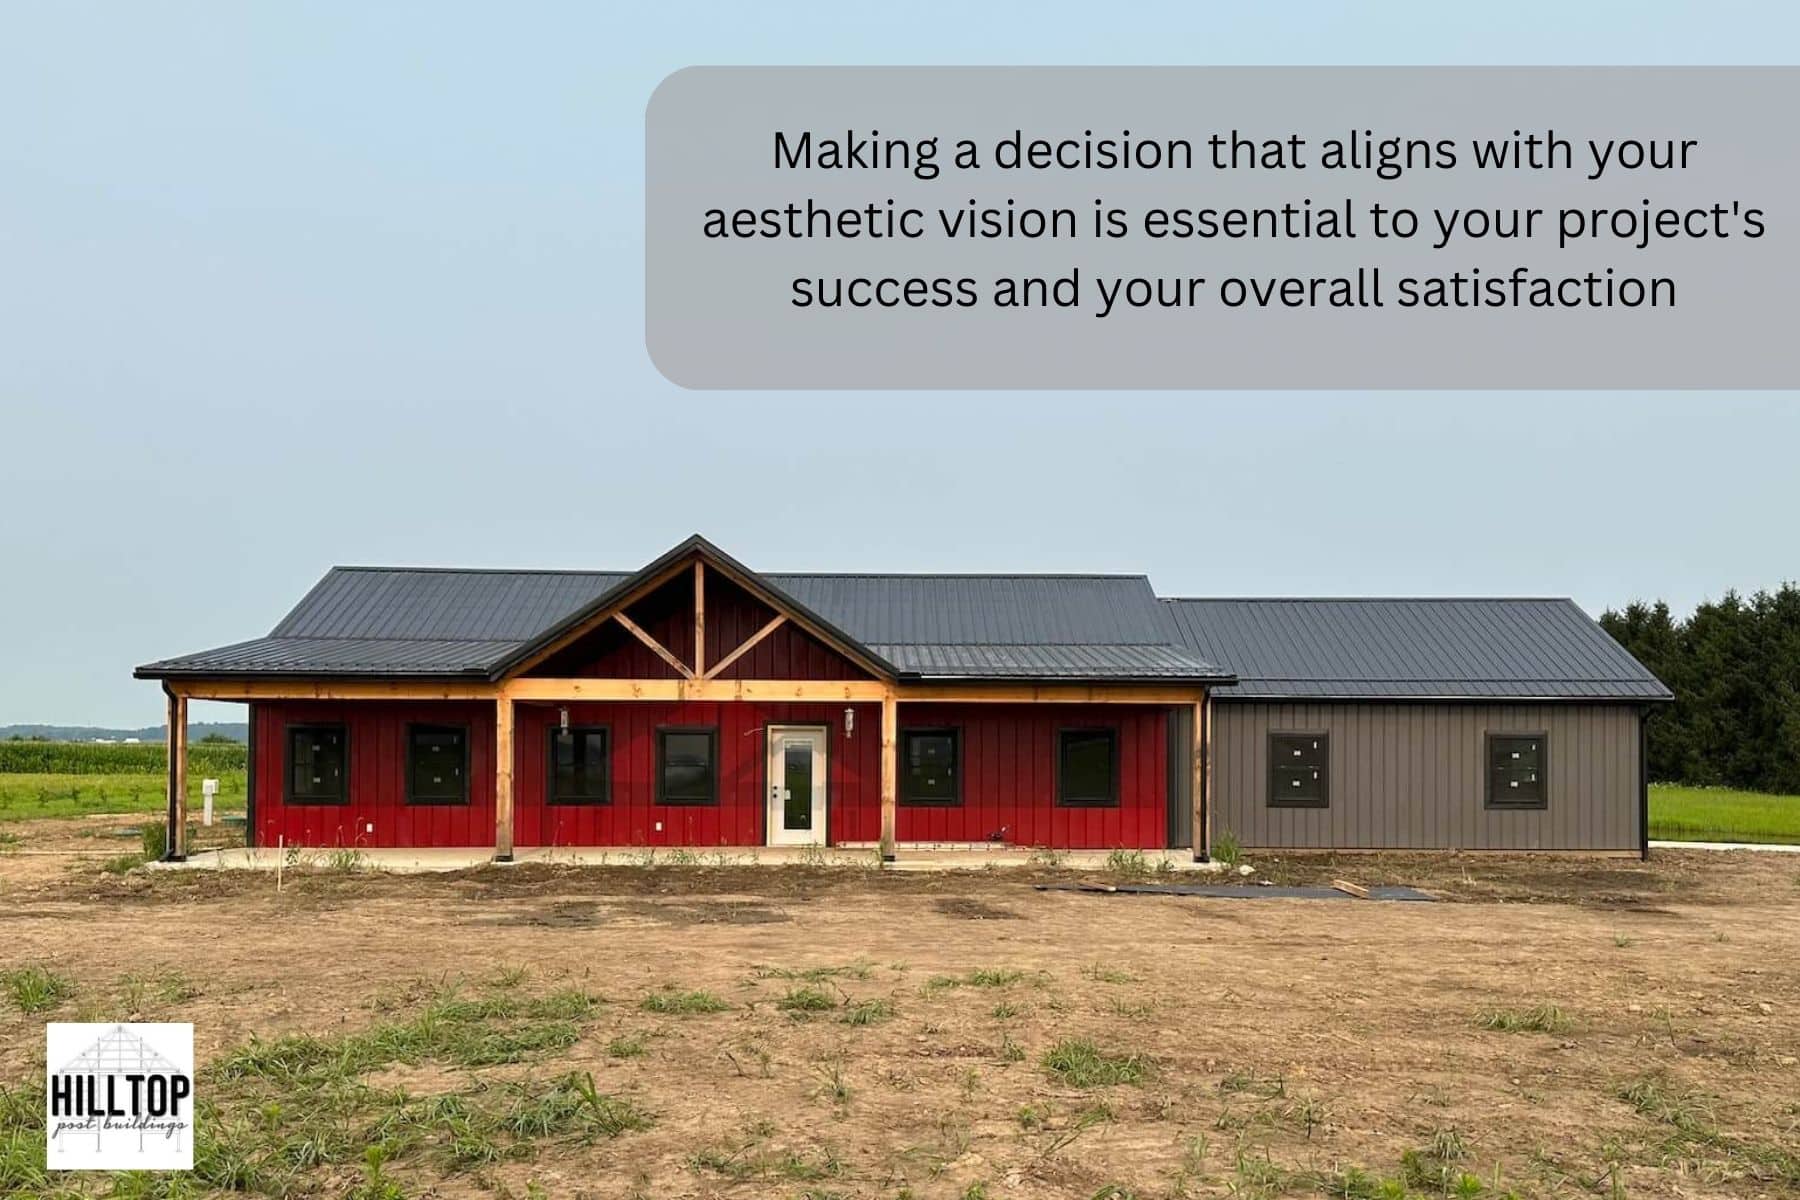 Making a decision that aligns with your aesthetic vision is essential to your pole barn project's success and overall satisfaction.